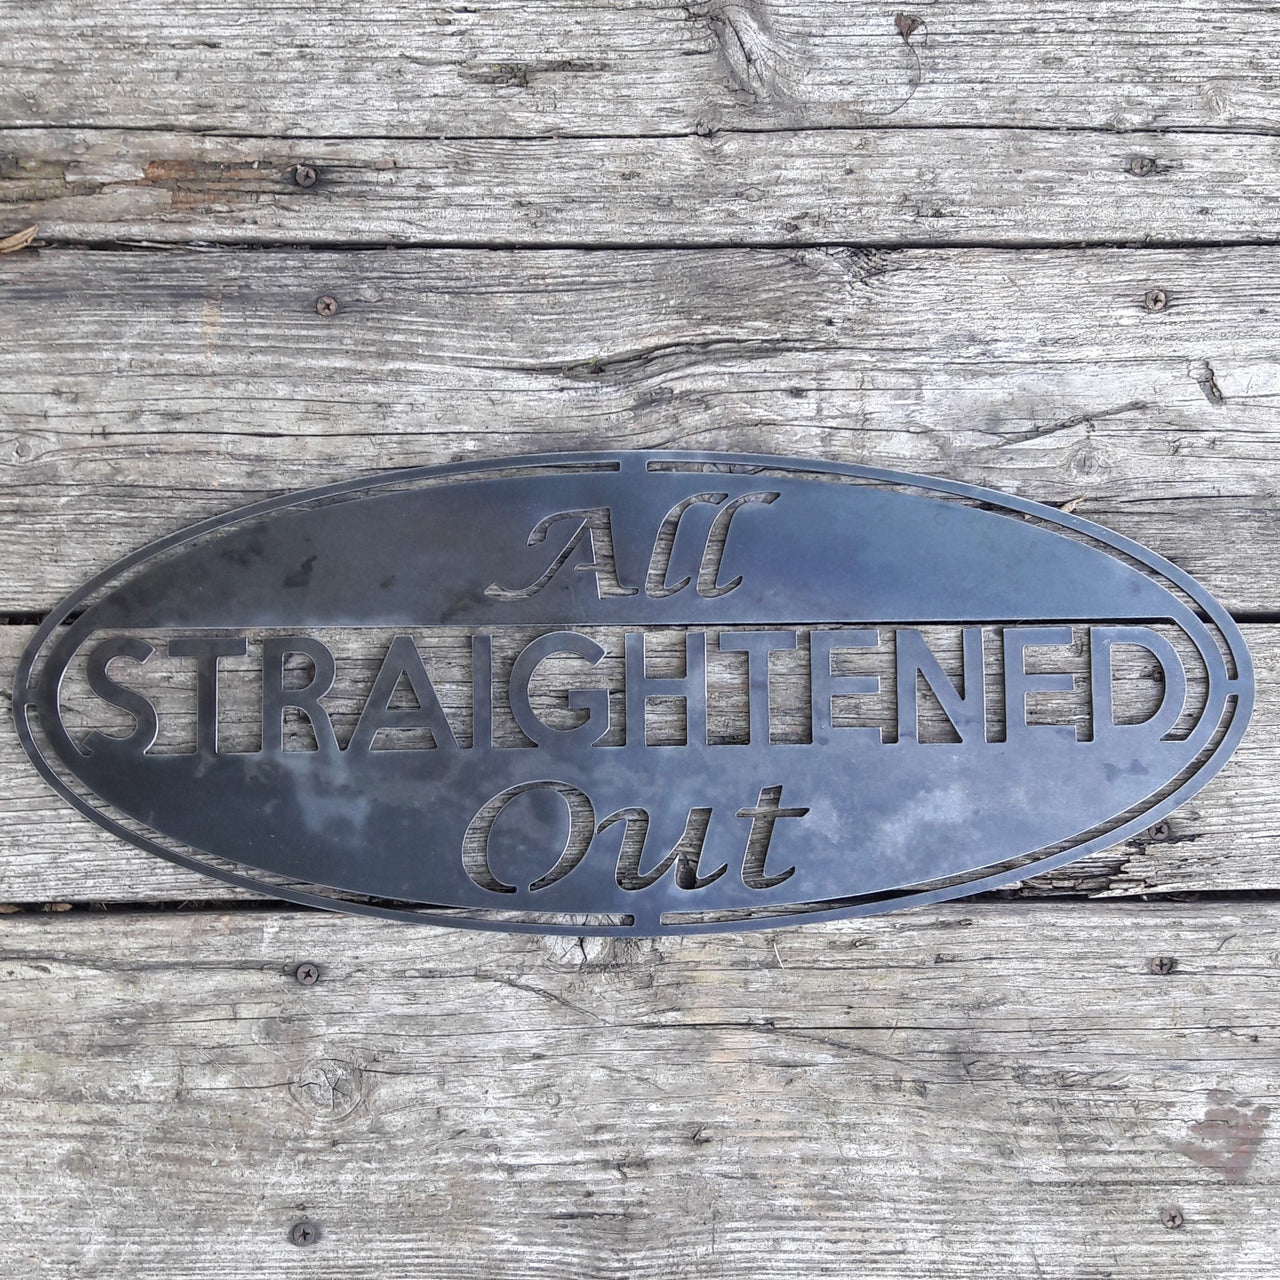 This metal sign is an oval, it has three lines of text. The sign reads, "All Straightened Out"